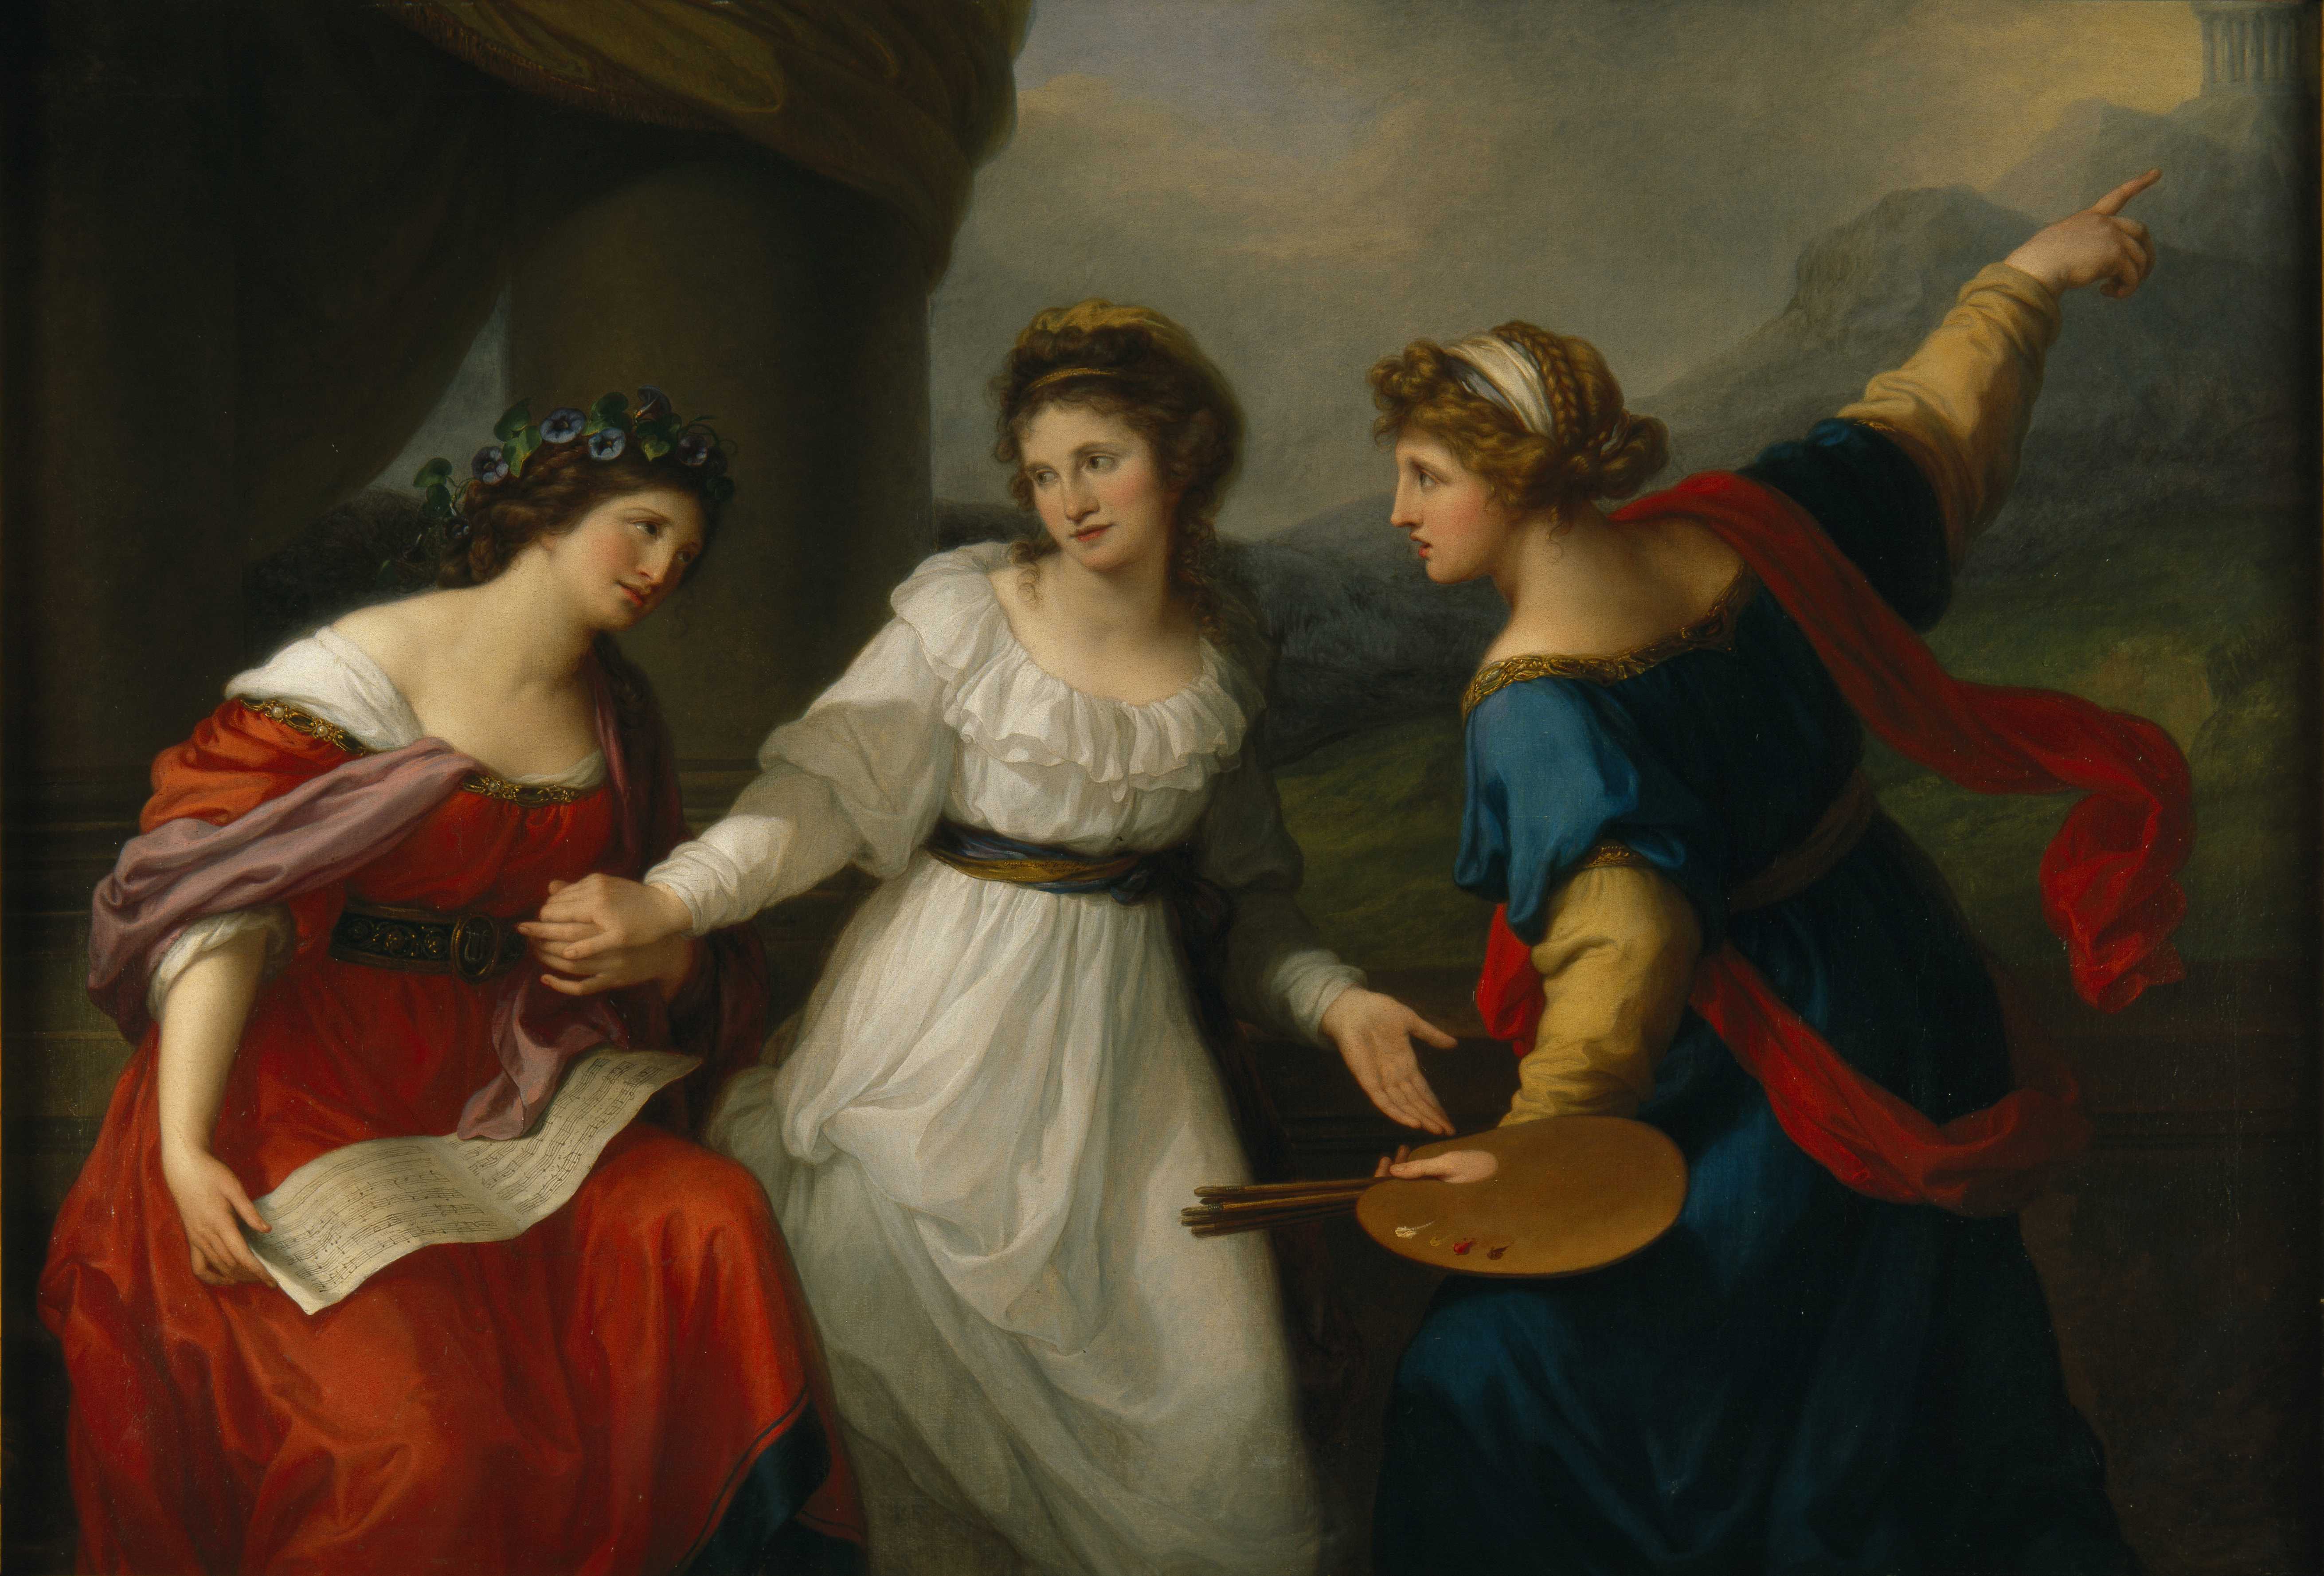 Angelica Kauffman, Self-portrait of the Artist hesitating between the Arts of Music and Painting, 1794. Oil on canvas, 147.3 x 215.9 cm. Nostell Priory © National Trust Images/John Hammond